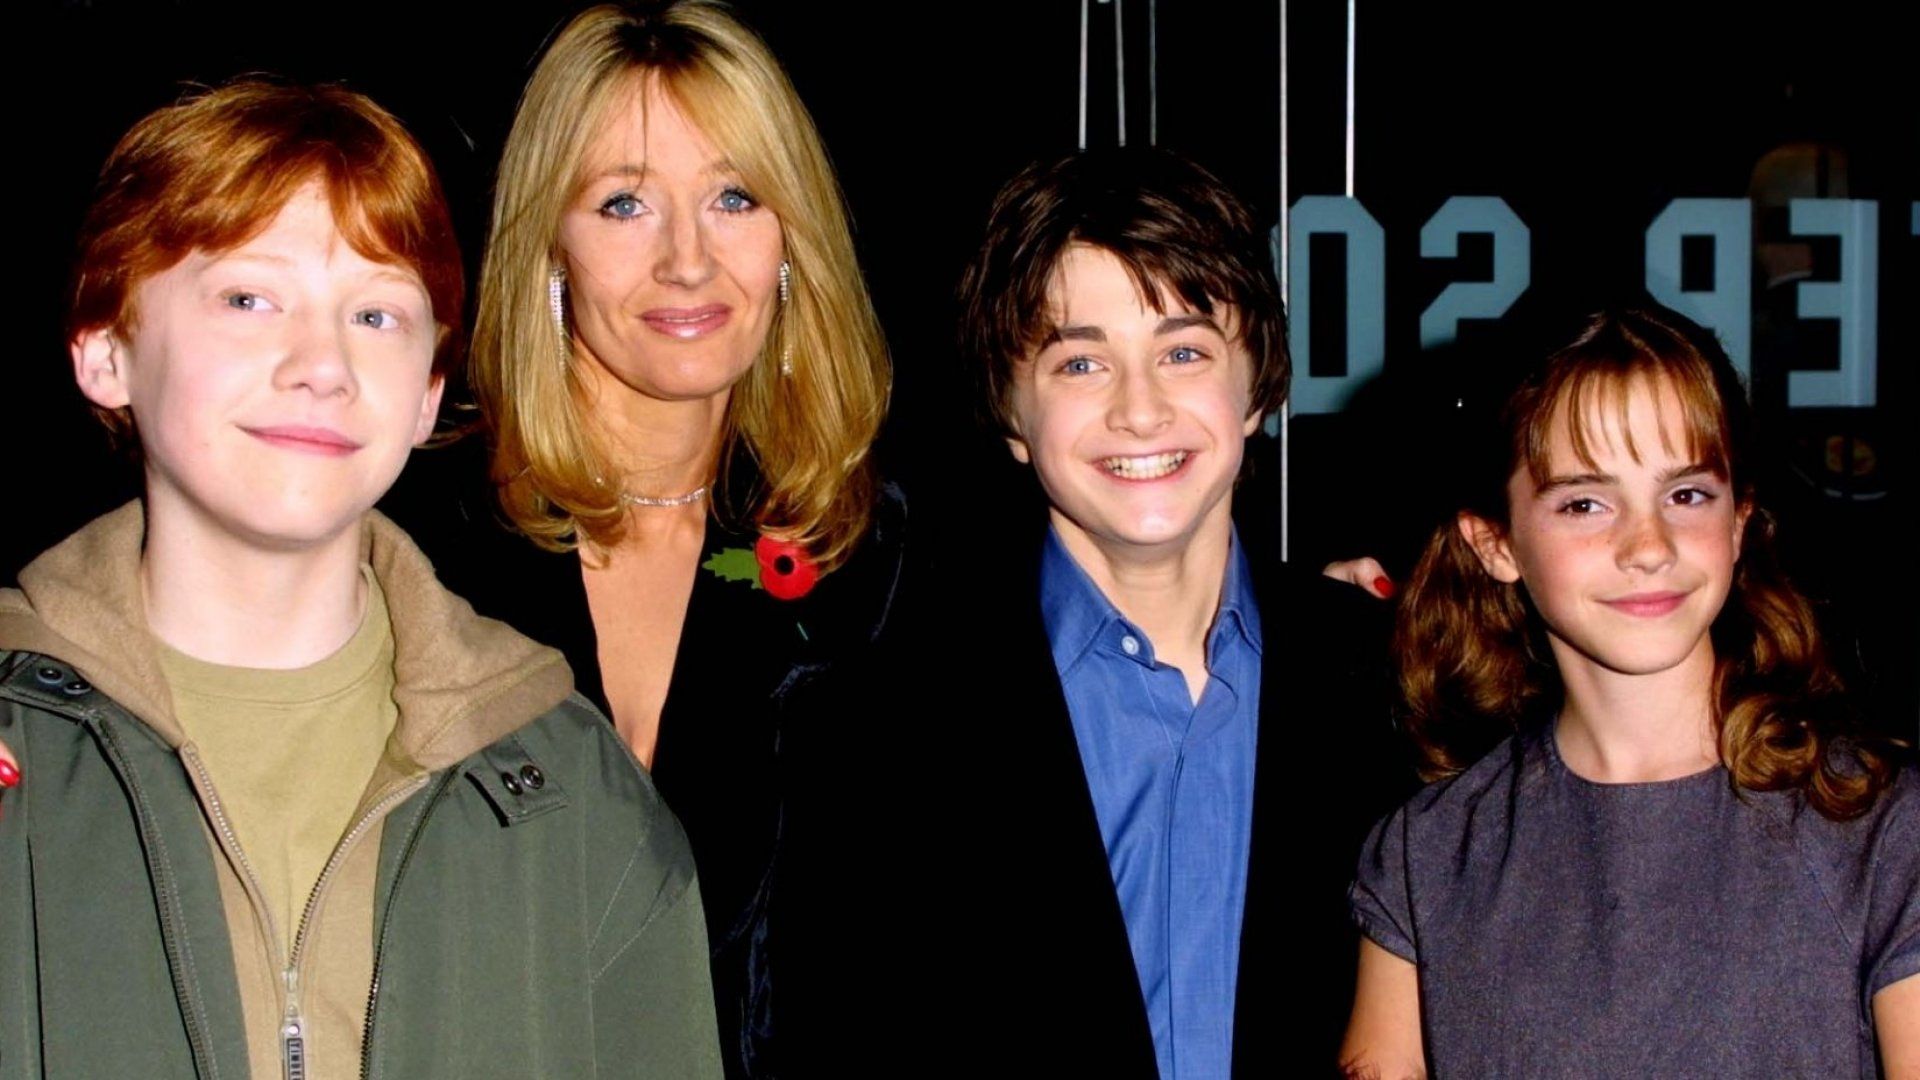 JK Rowling with Rupert Grint, Daniel Radcliffe, and Emma Watson at a 'Harry Potter' premiere